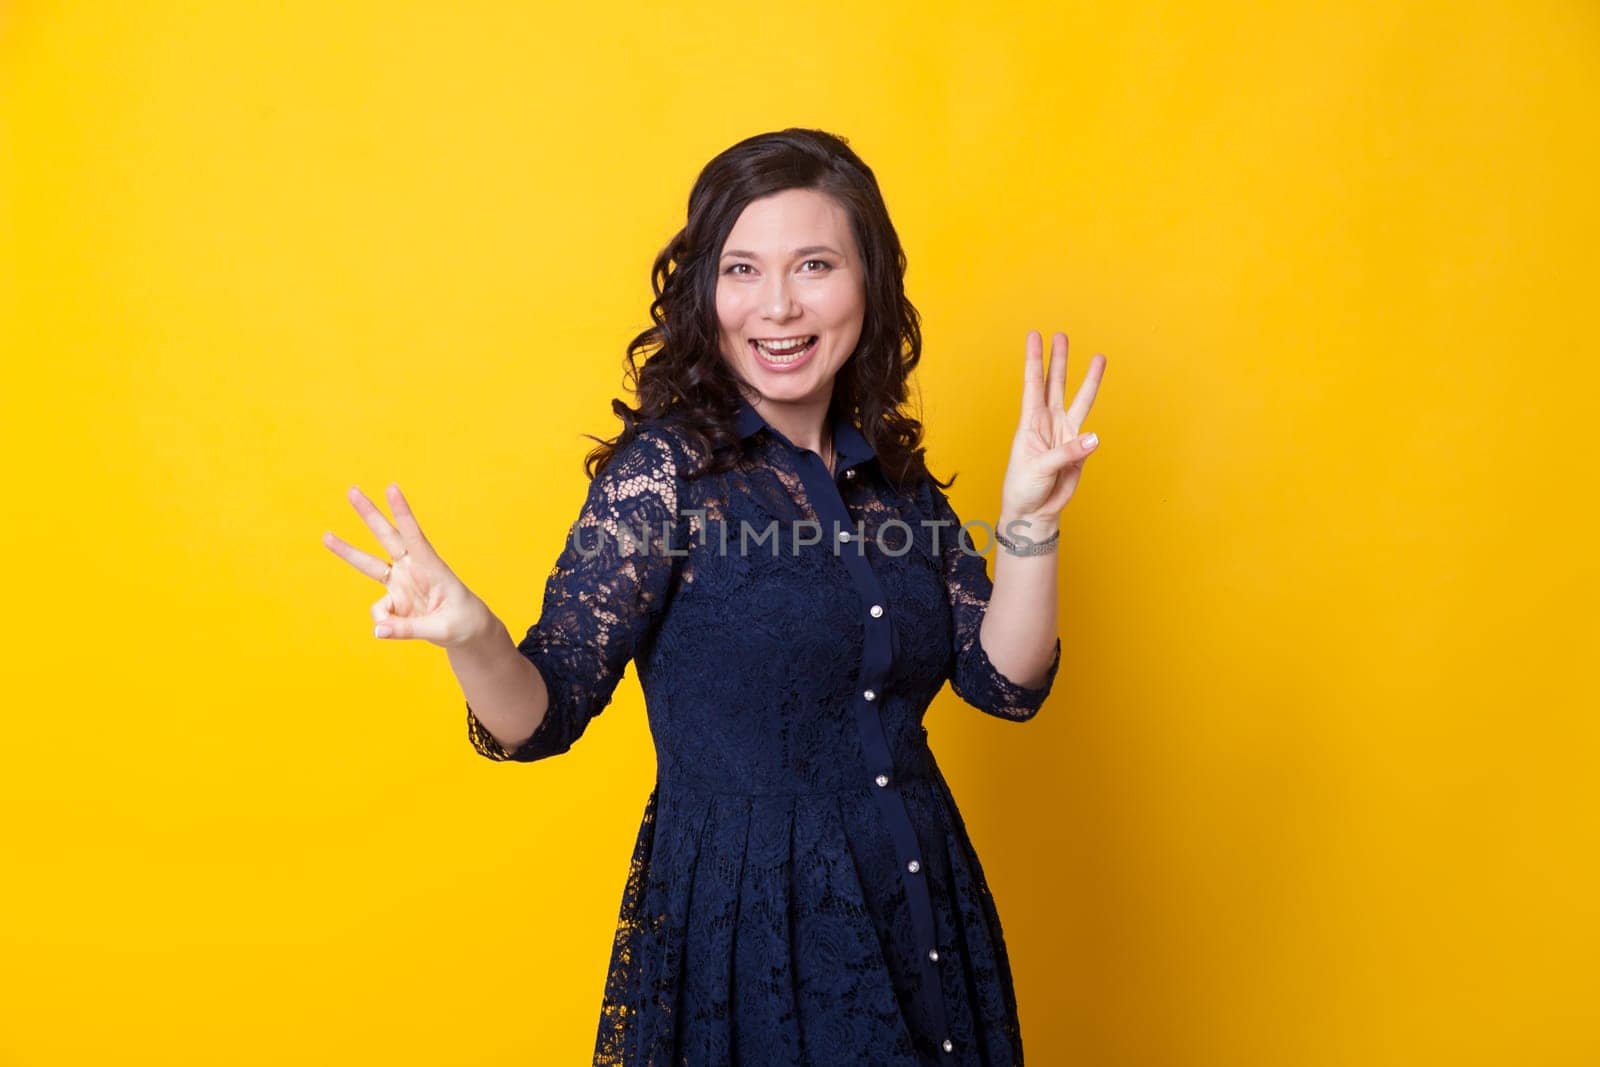 portrait of a beautiful woman in a blue dress against a yellow background